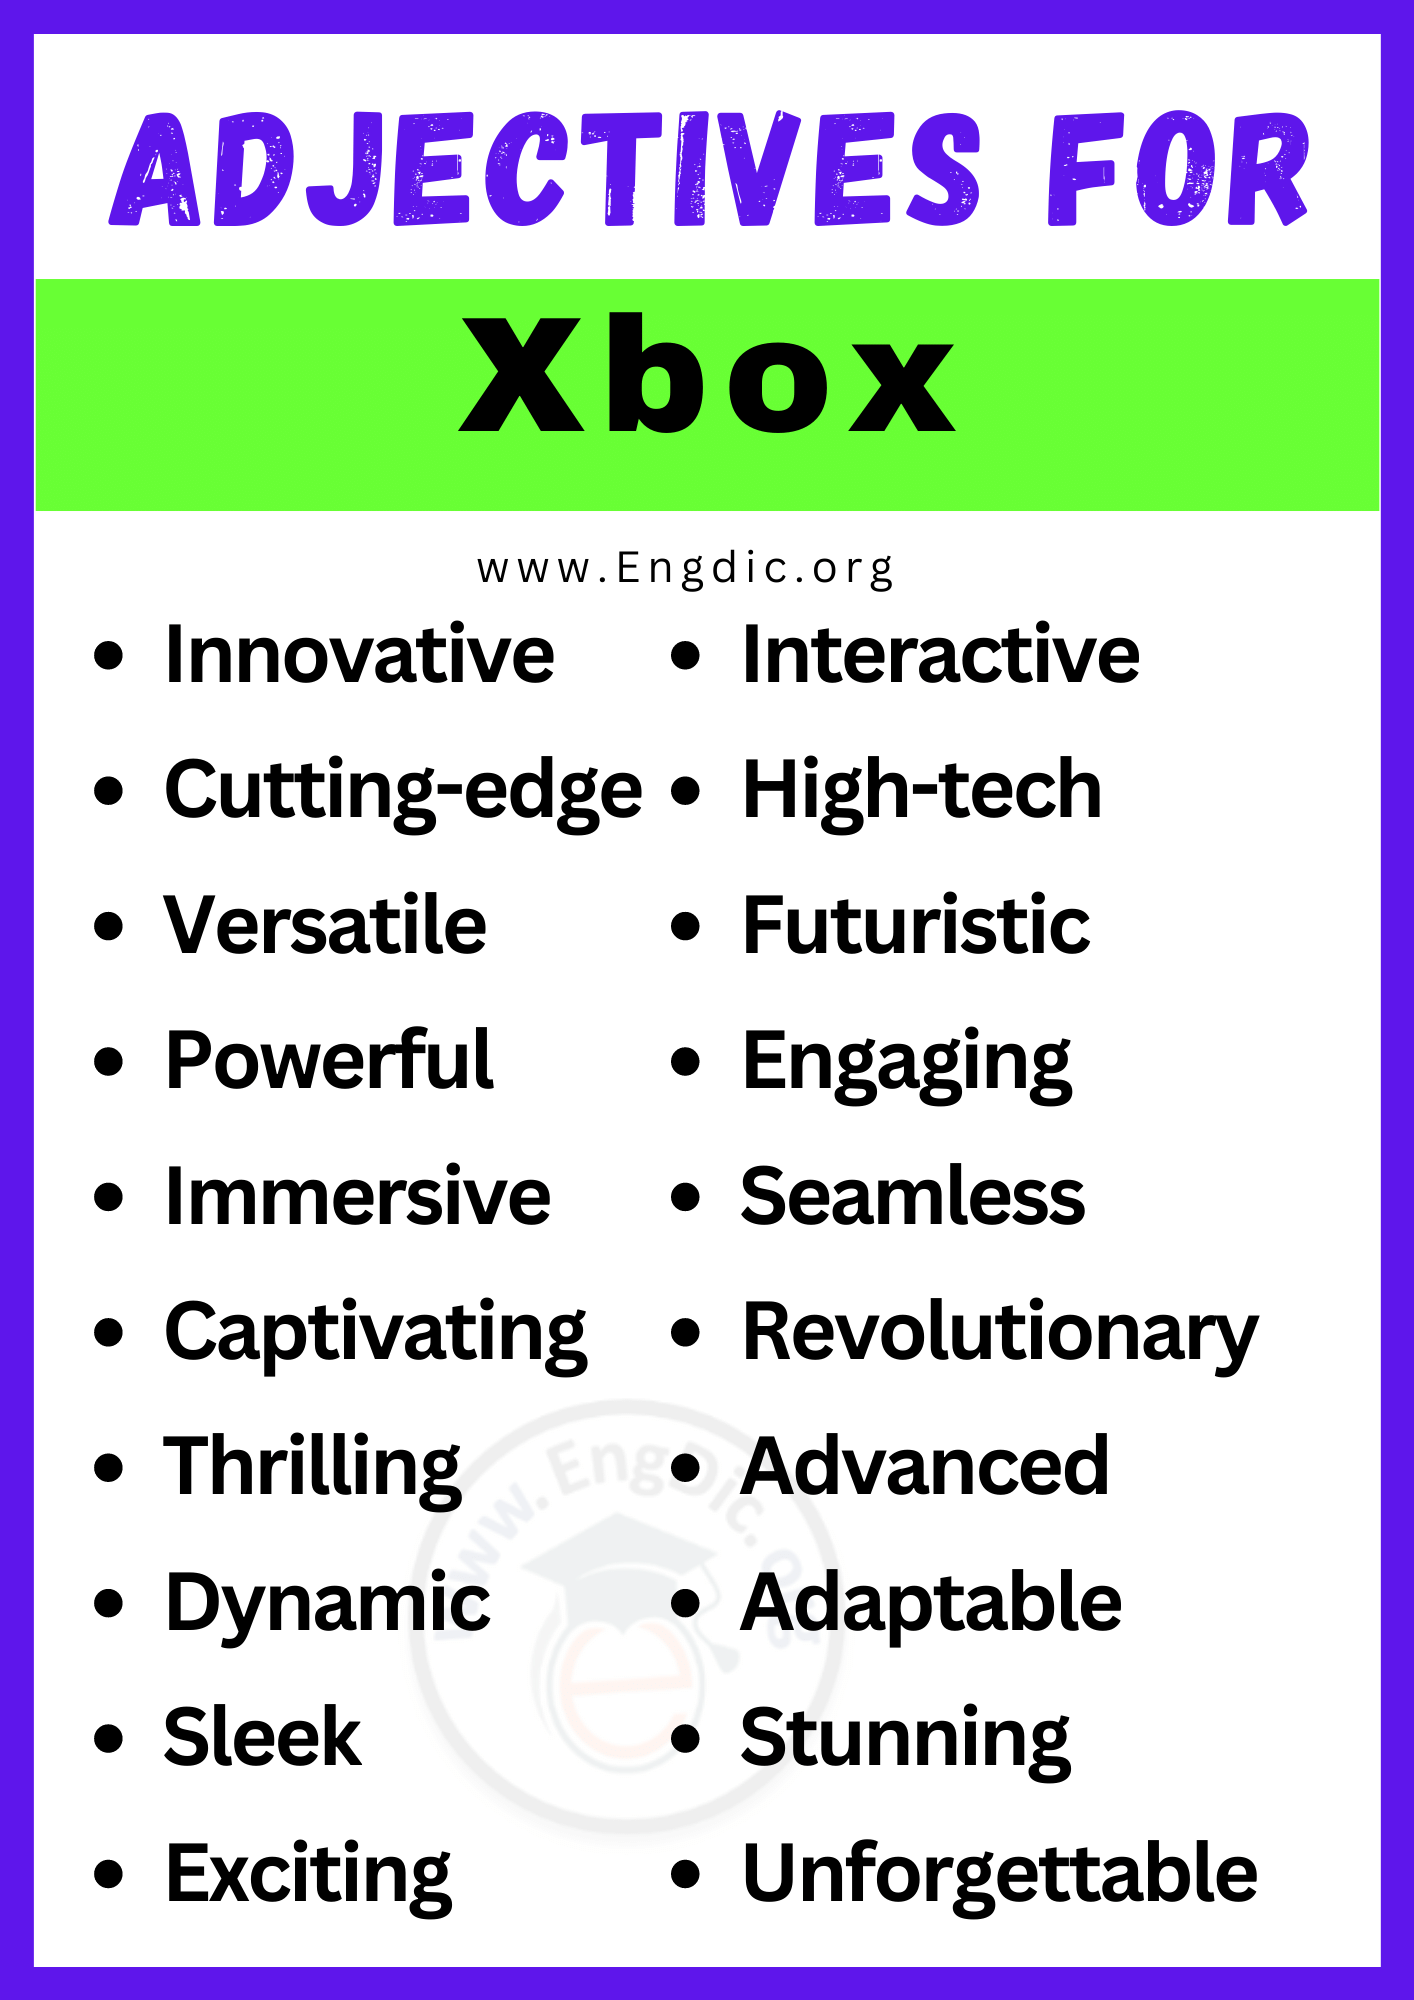 Adjectives for Xbox